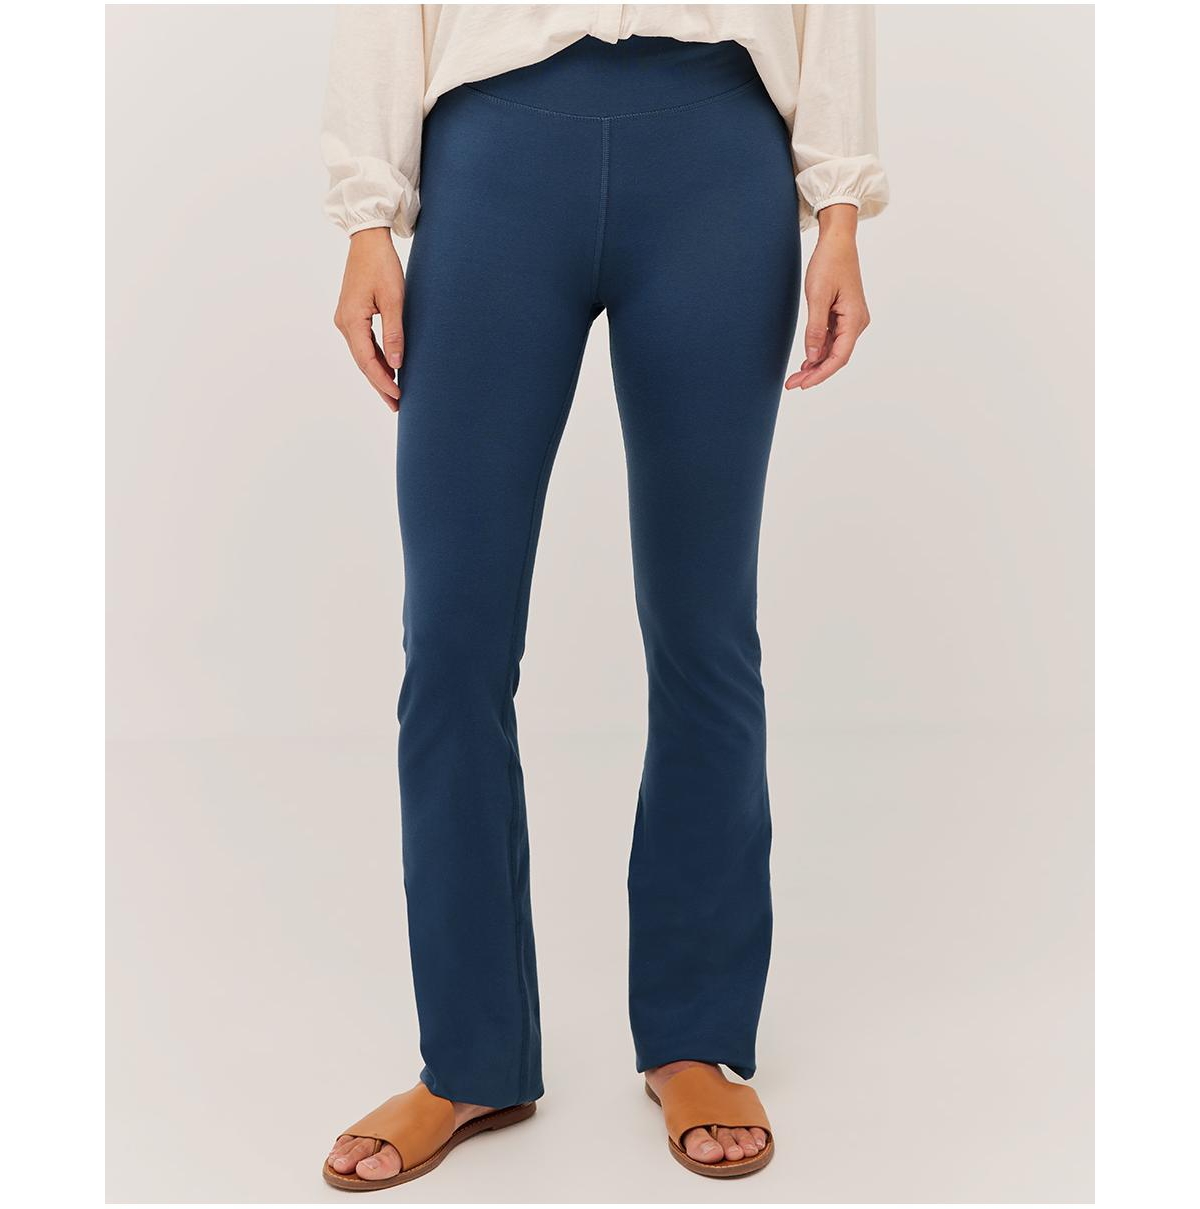 PureFit Bootcut Legging - Full Length Made With Organic Cotton - French navy